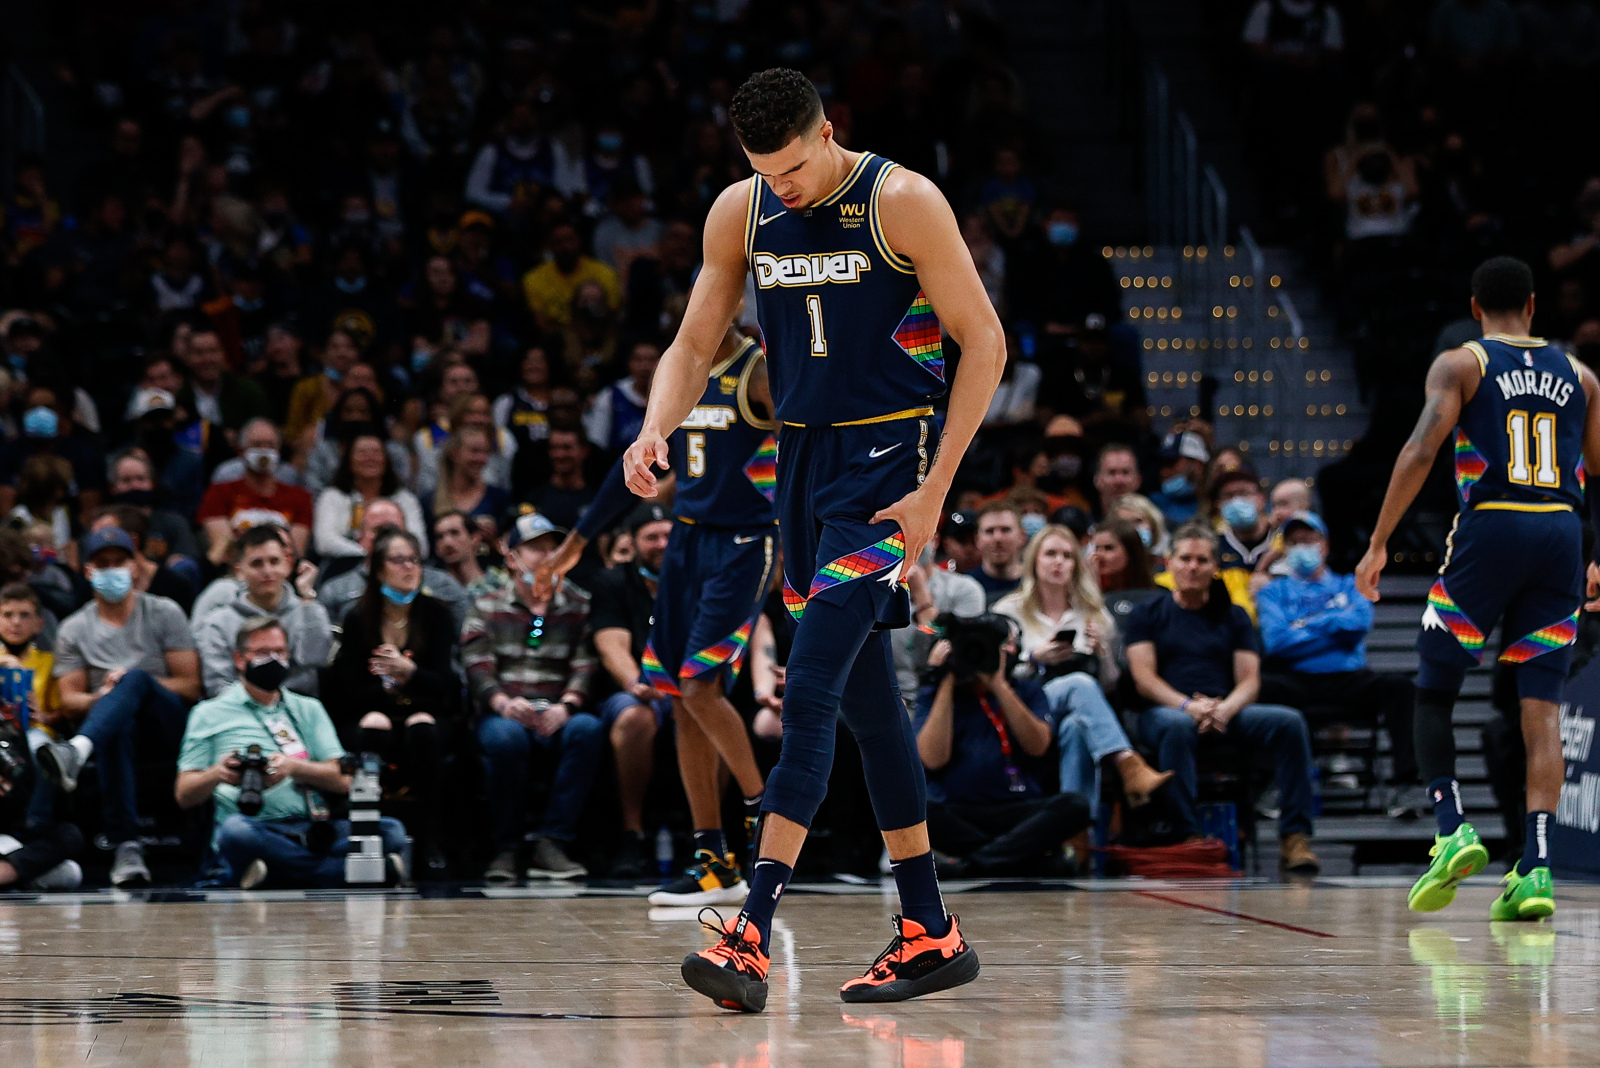 The Denver Nuggets need Michael Porter Jr. to play like a